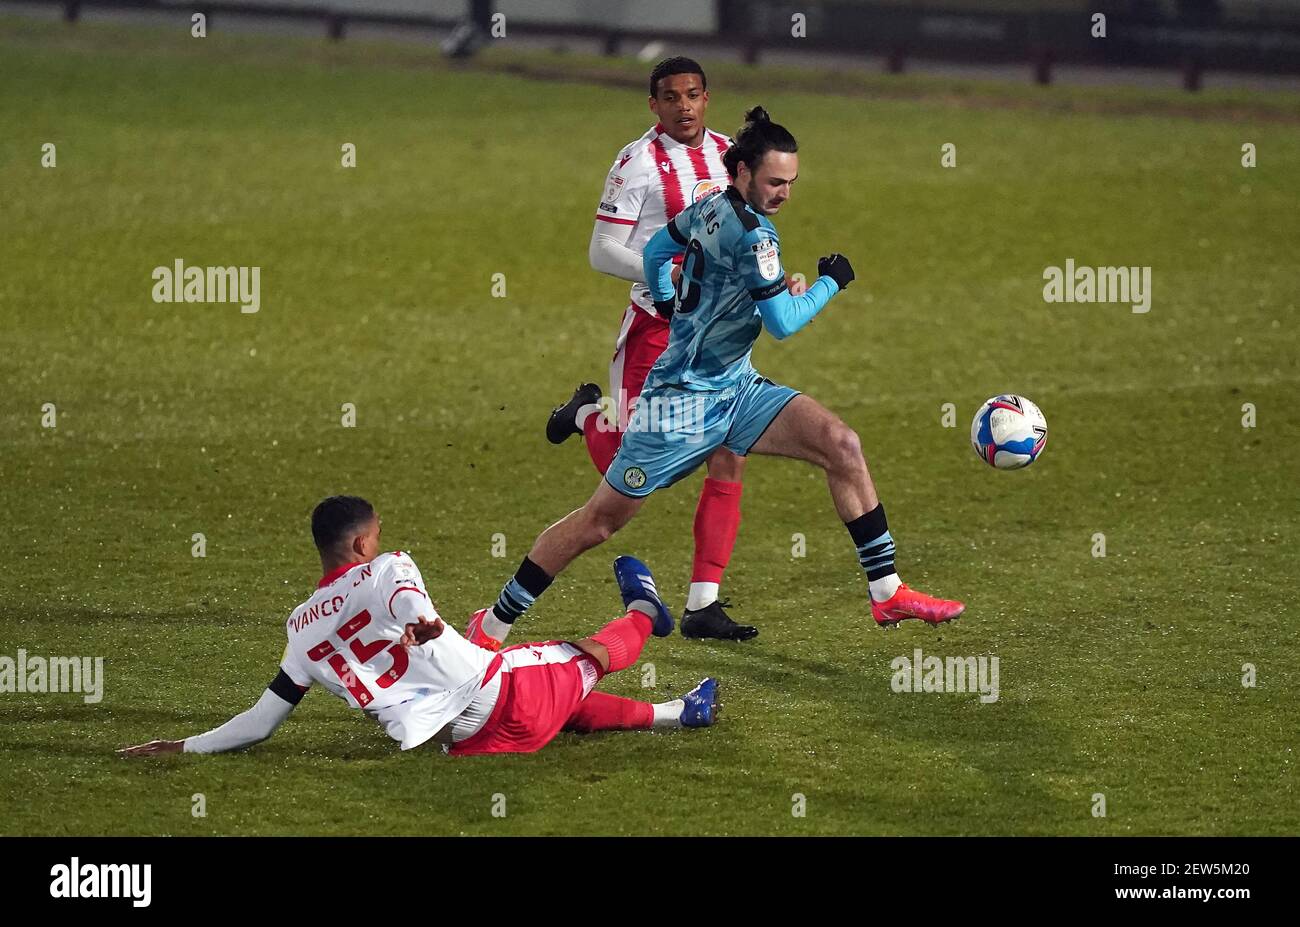 Forest Green Rovers' Aaron Collins jumps the tackle from Stevenage's Terence Vancooten during the Sky Bet League Two match at the Lamex Stadium, Stevenage. Picture date: Tuesday March 2, 2021. Stock Photo